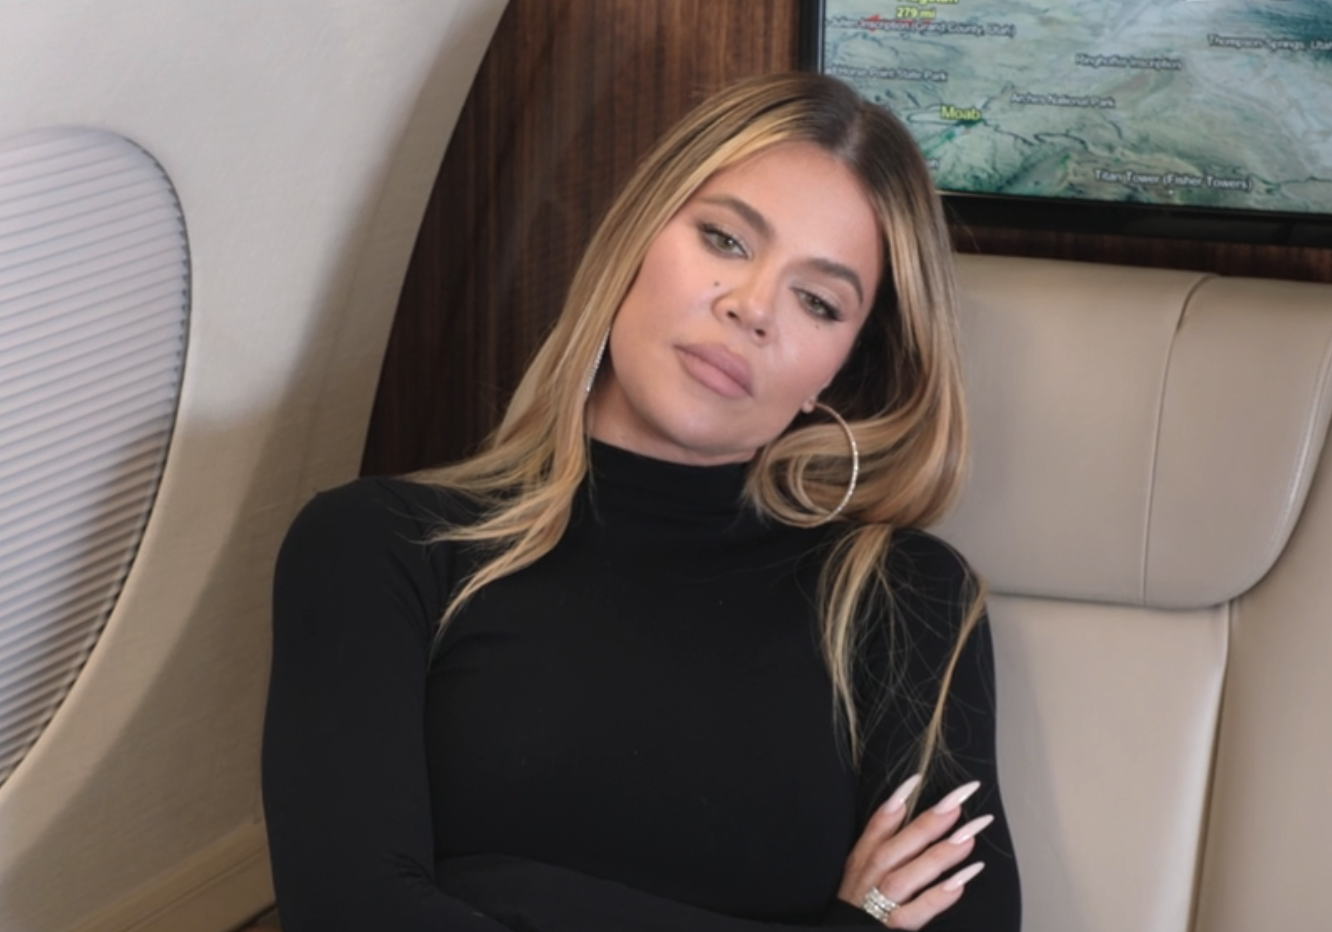 Khloé Kardashian is sitting in an airplane seat, wearing a black turtleneck long-sleeve shirt with her arms crossed, looking thoughtful